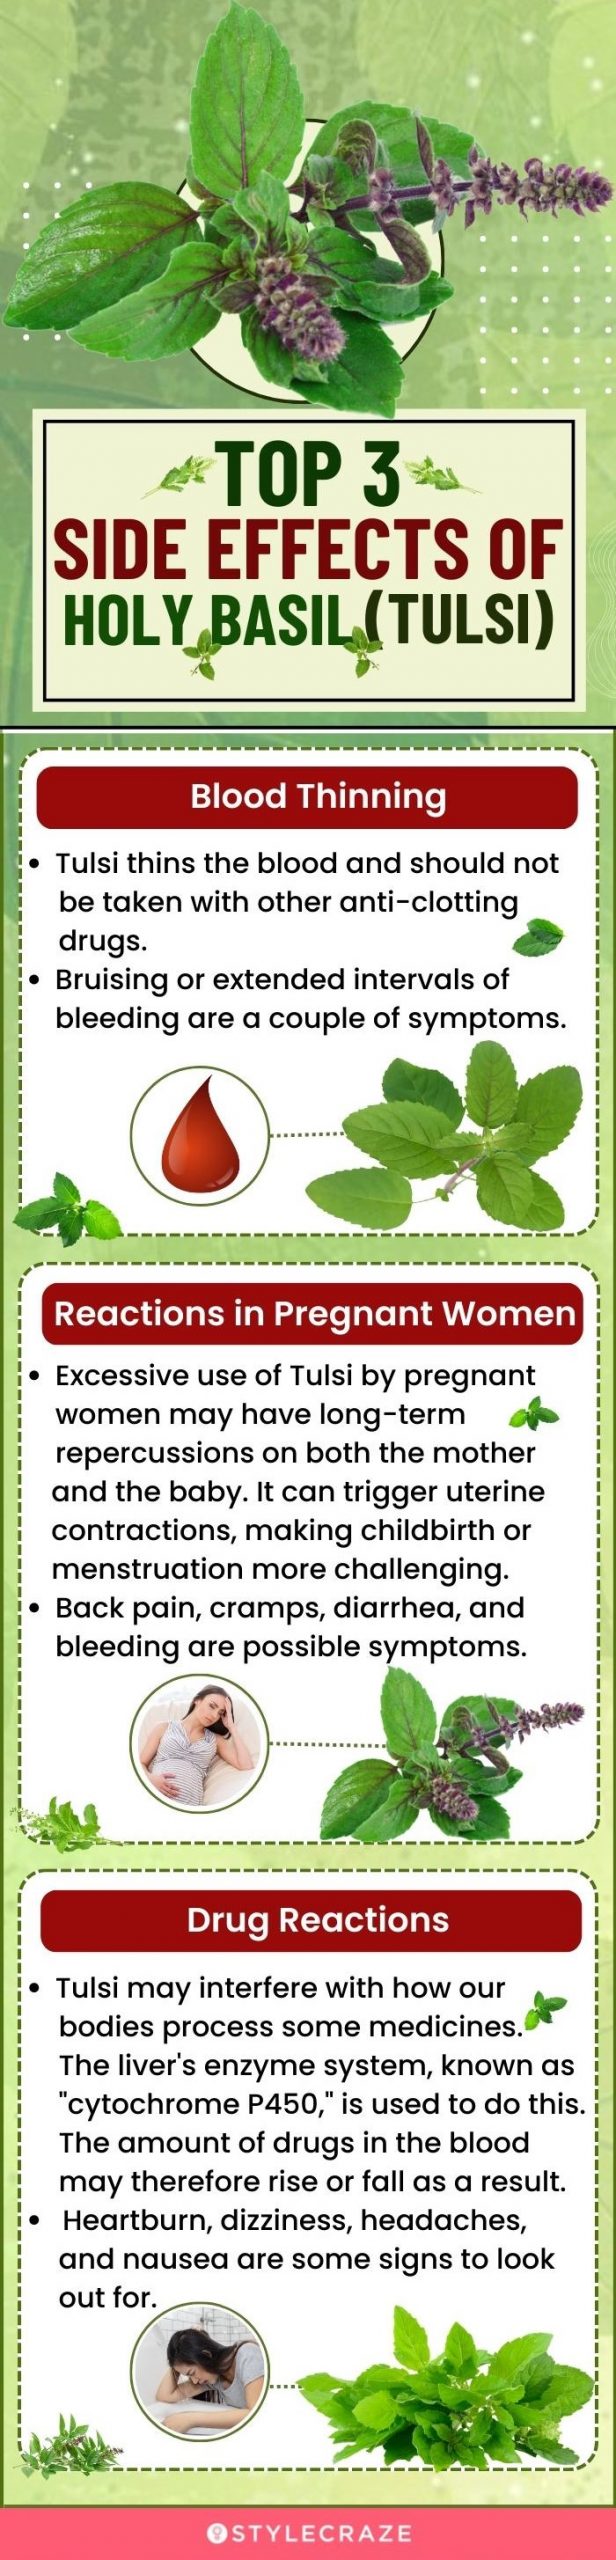 top 3 side effects of holy basil(tulsi) [infographic]